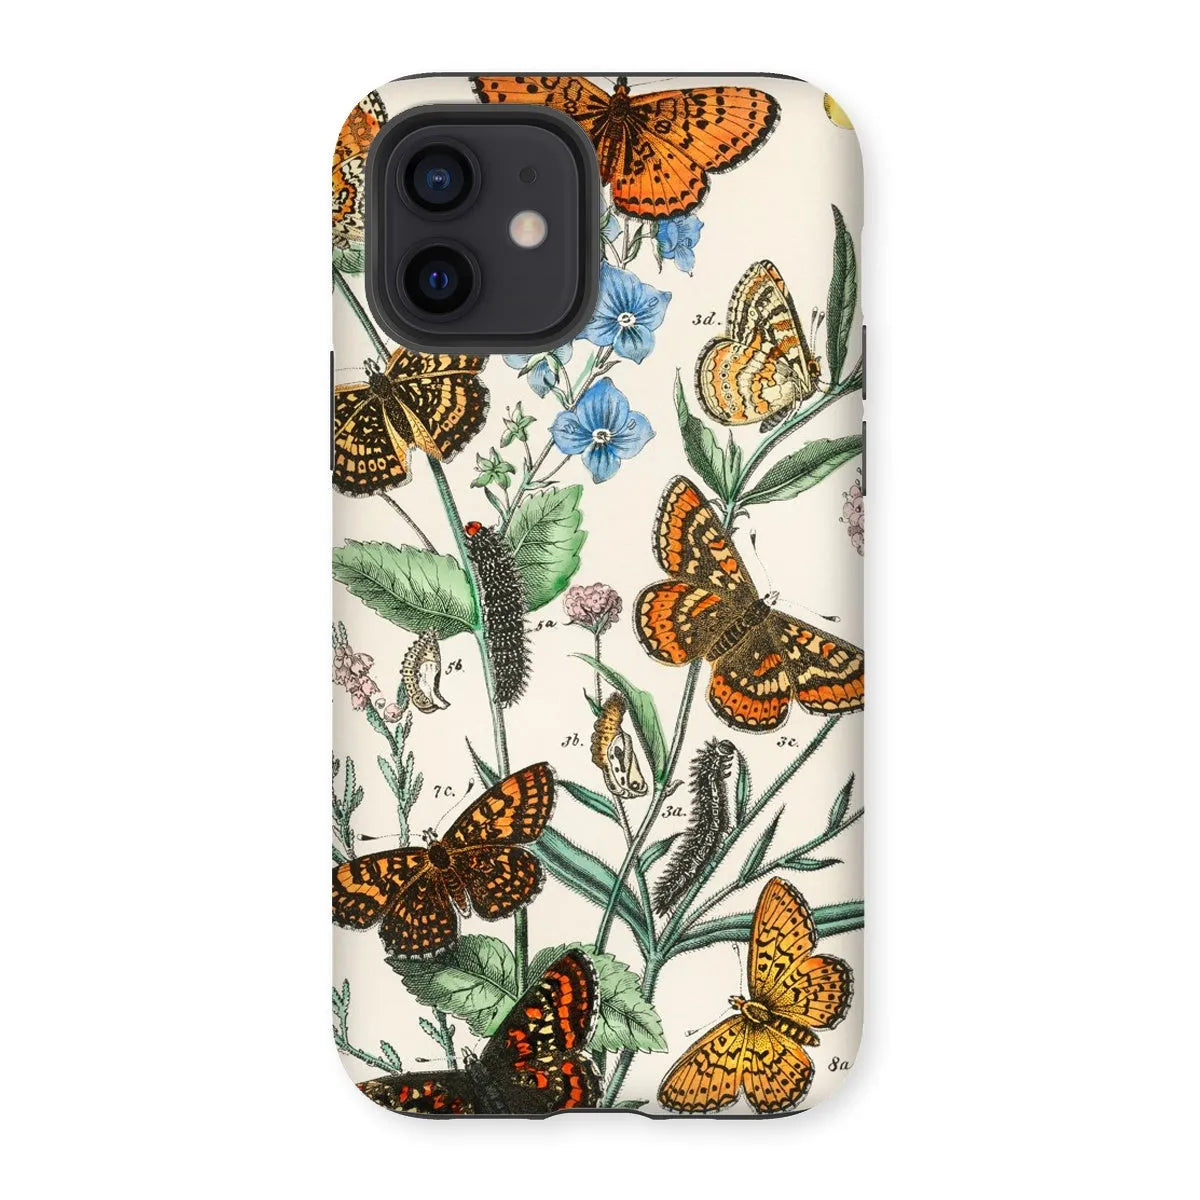 European Butterflies And Moths 2 Art Phone Case - William Forsell Kirby - Iphone 12 / Matte - Mobile Phone Cases